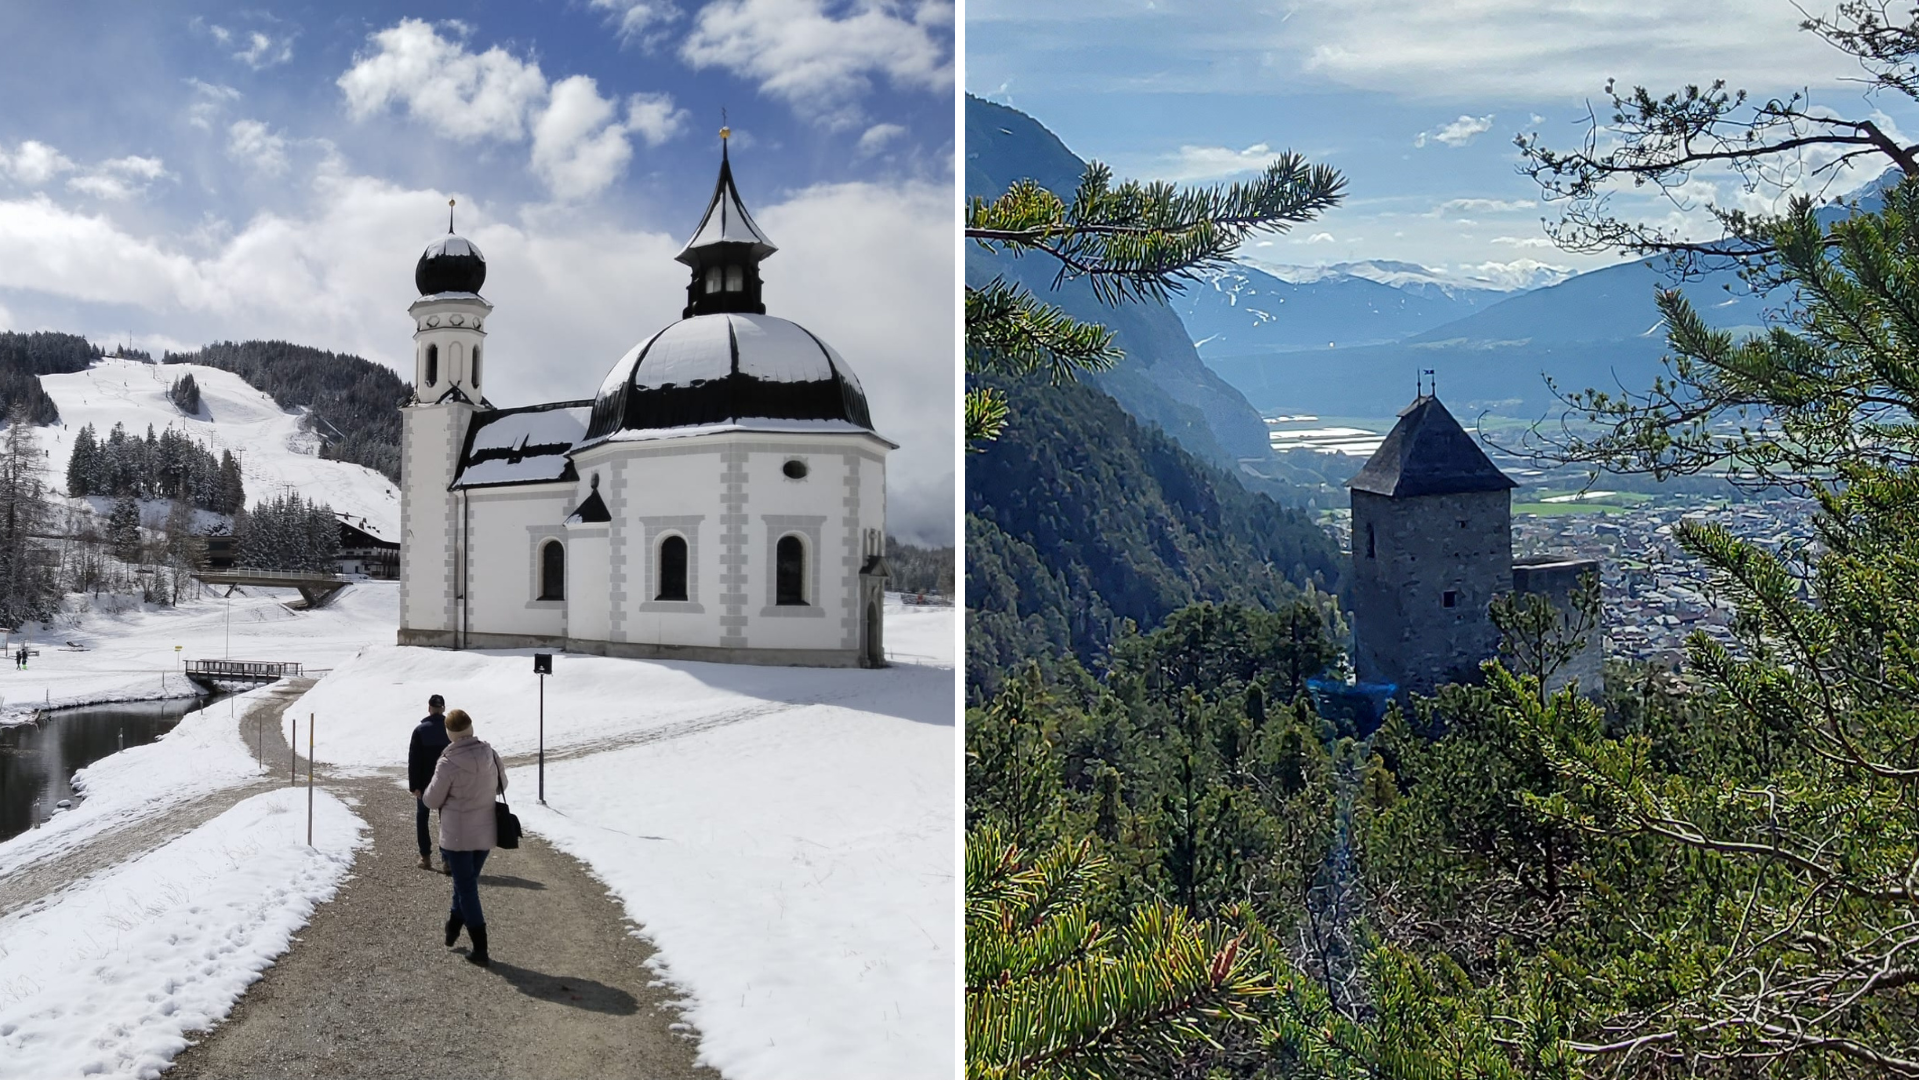 On Sunday it was white - like here in Seefeld (left). During Holy Week - except on Wednesday - it should be mild and friendly. On the right, the view of the Fragenstein castle ruins in Zirl. (Bild: Peter Freiberger, Hubert Rauth)